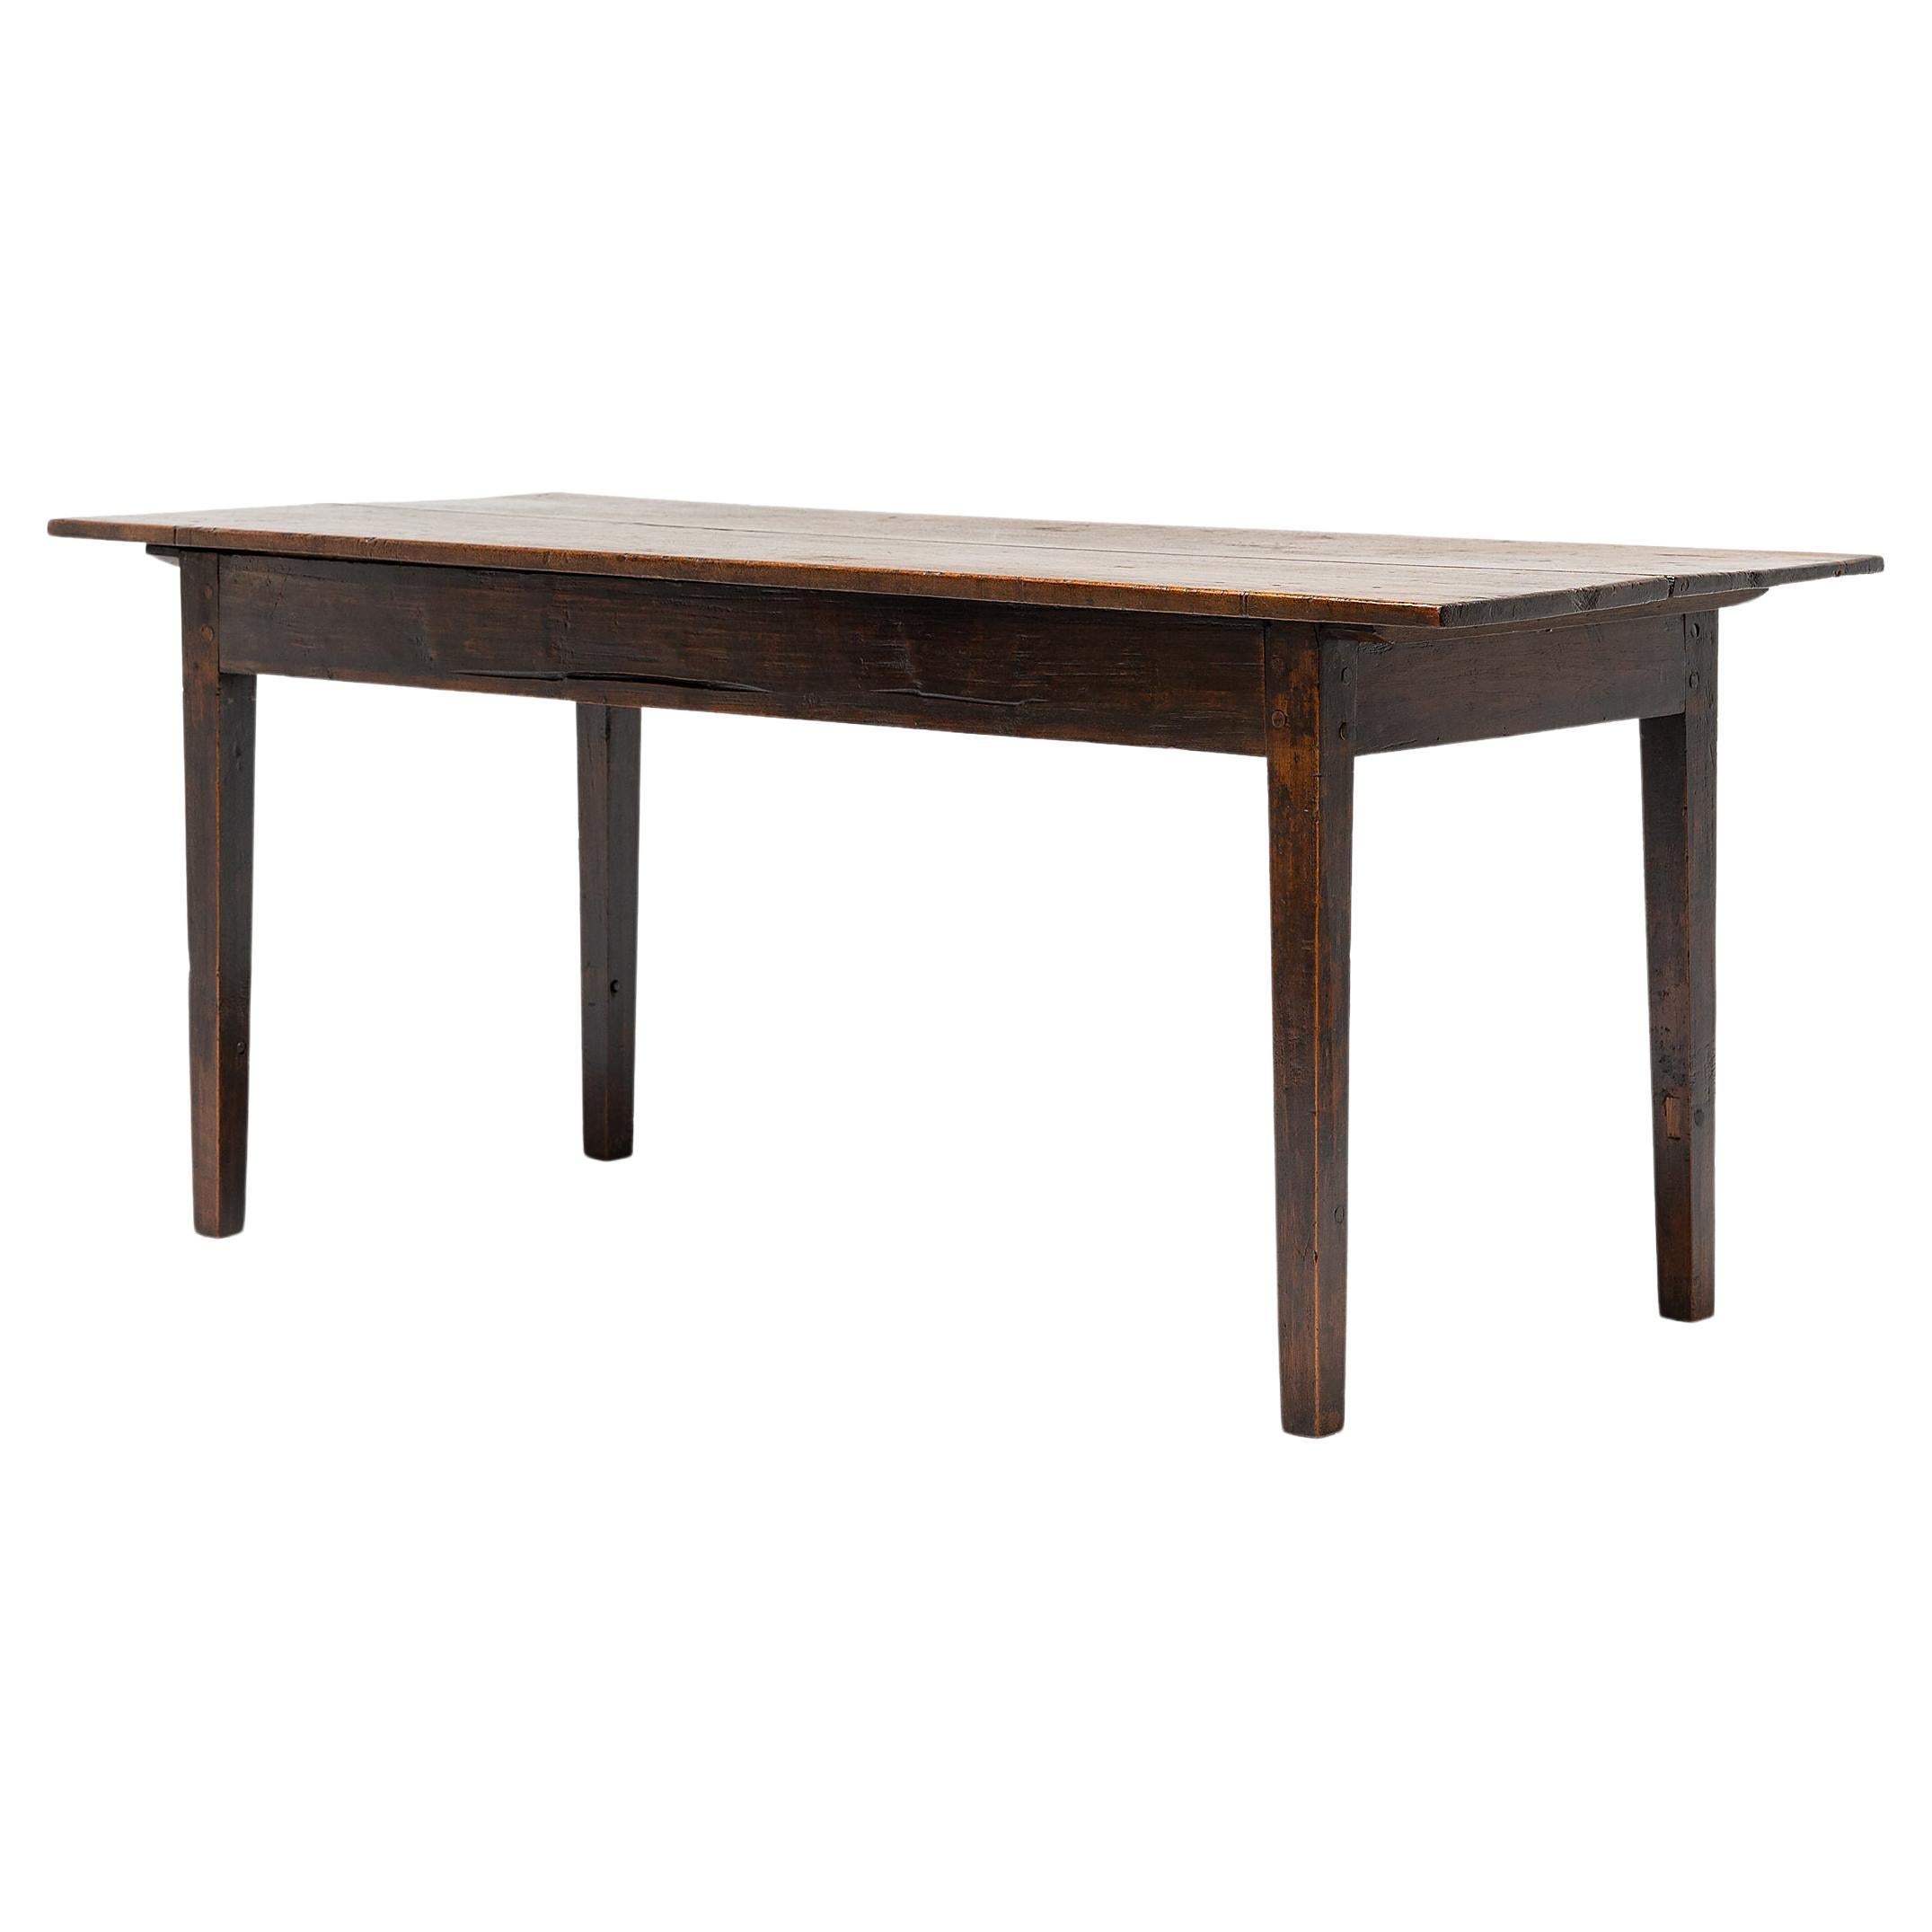 Shaker Dining Table, c. 1850